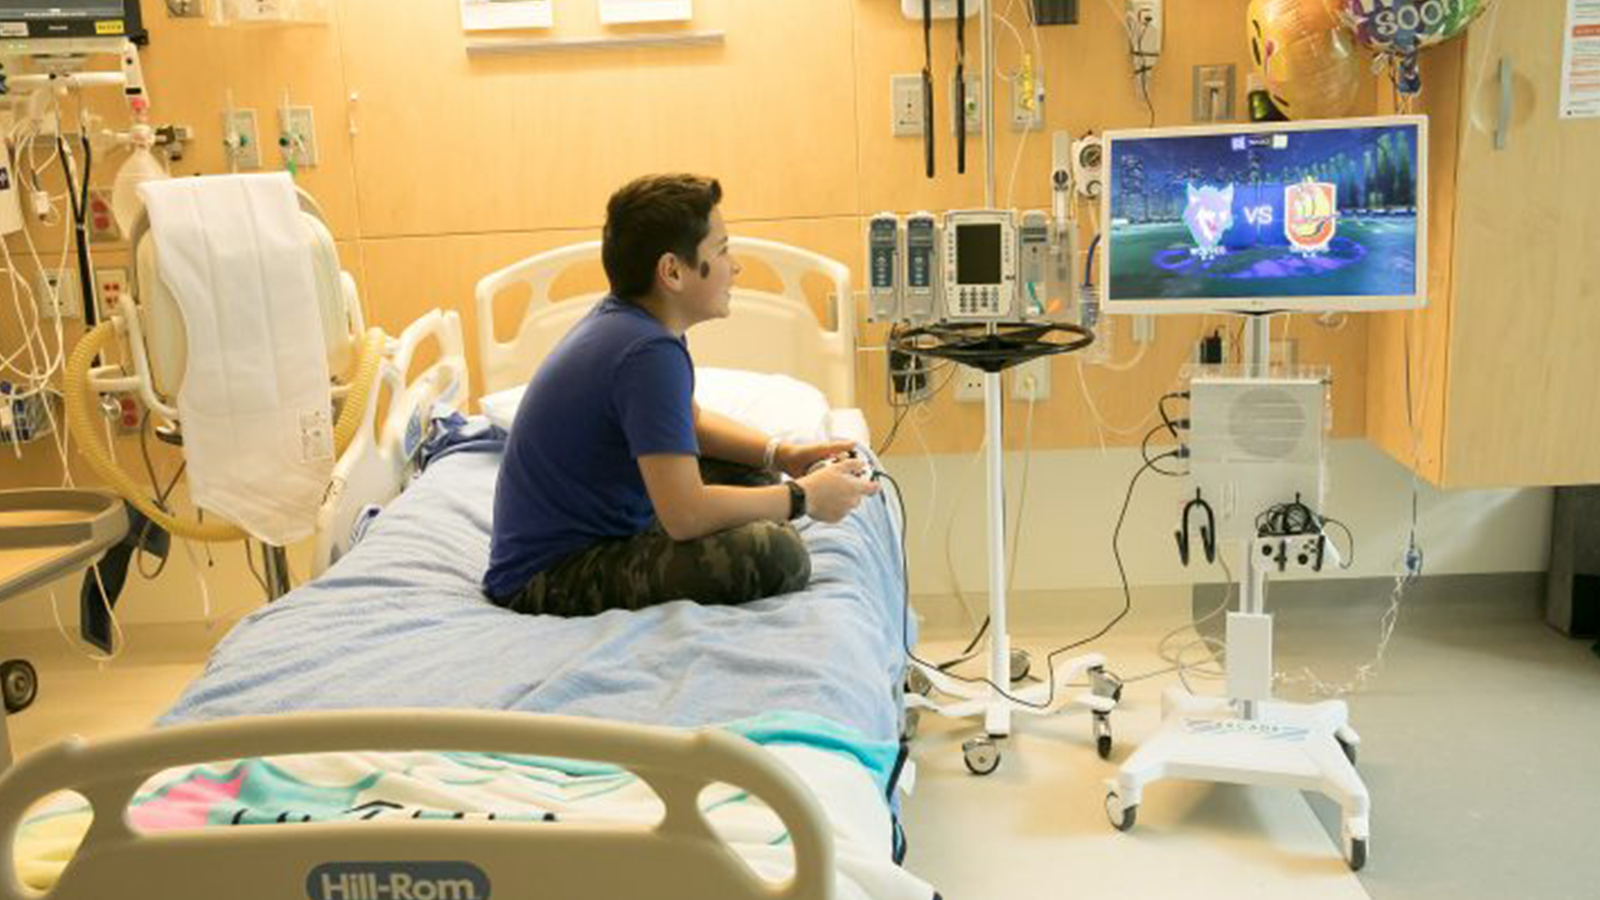 A young child in a hospital setting playing video games.